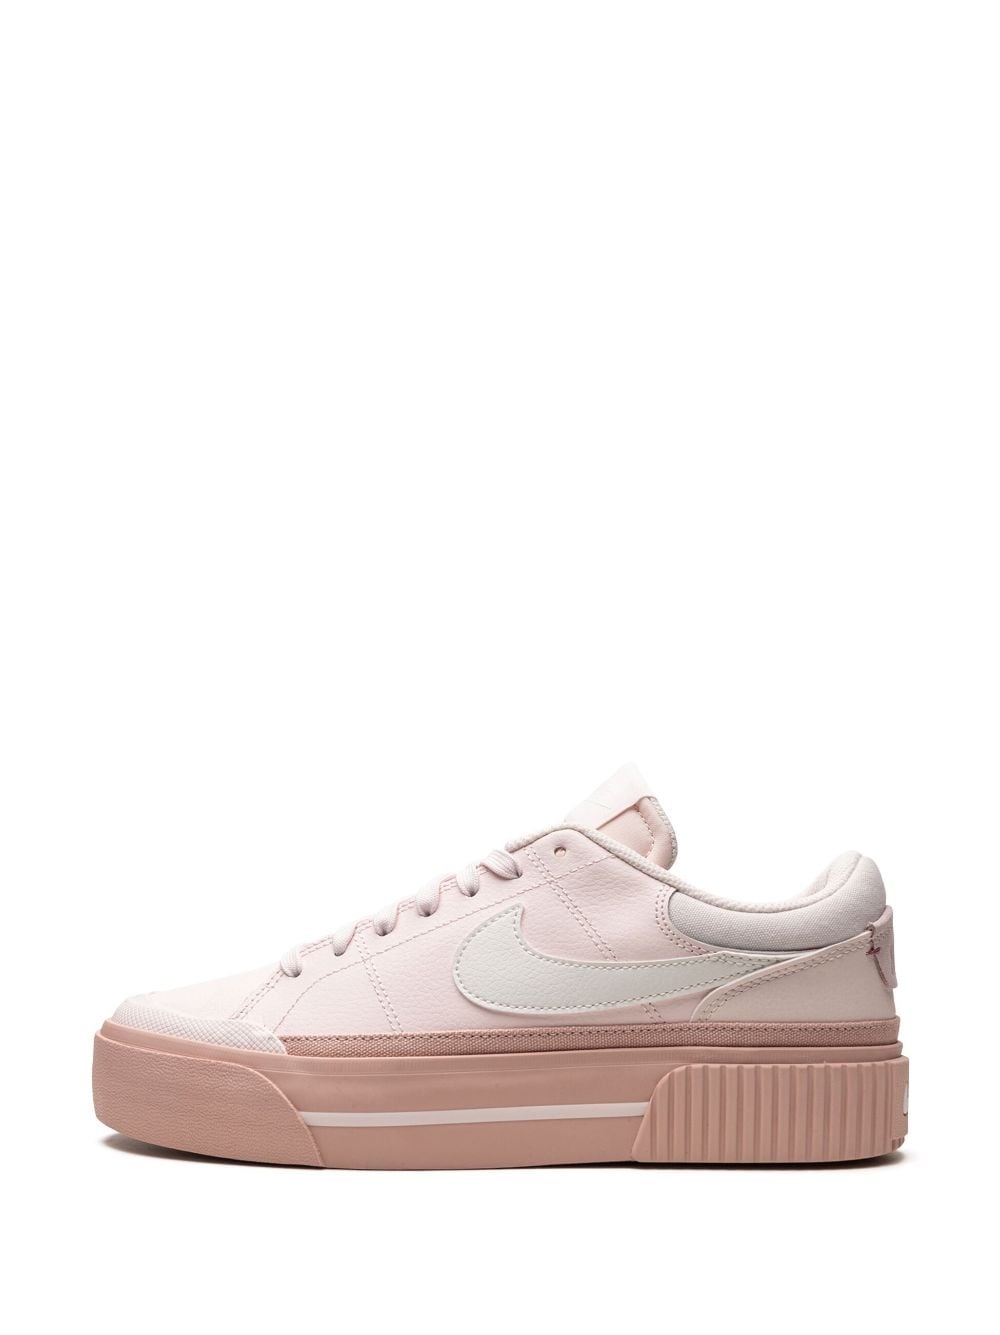 Court Legacy Lift "Light Soft Pink" sneakers - 5